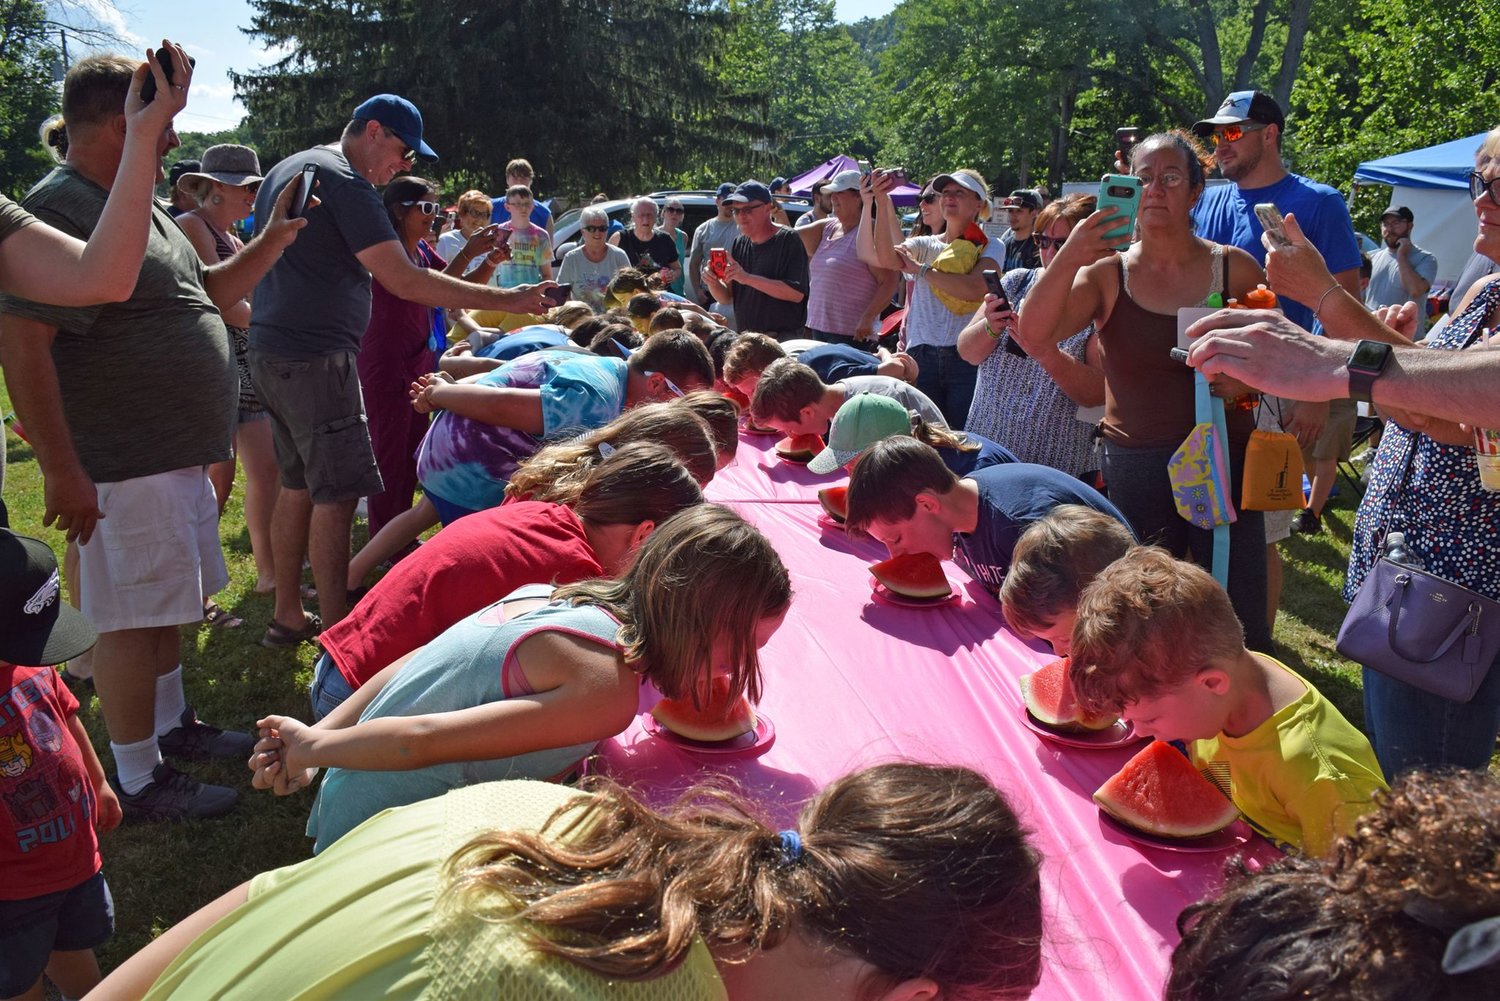 The Watermelon Eating Contest began with the 12 and under category.